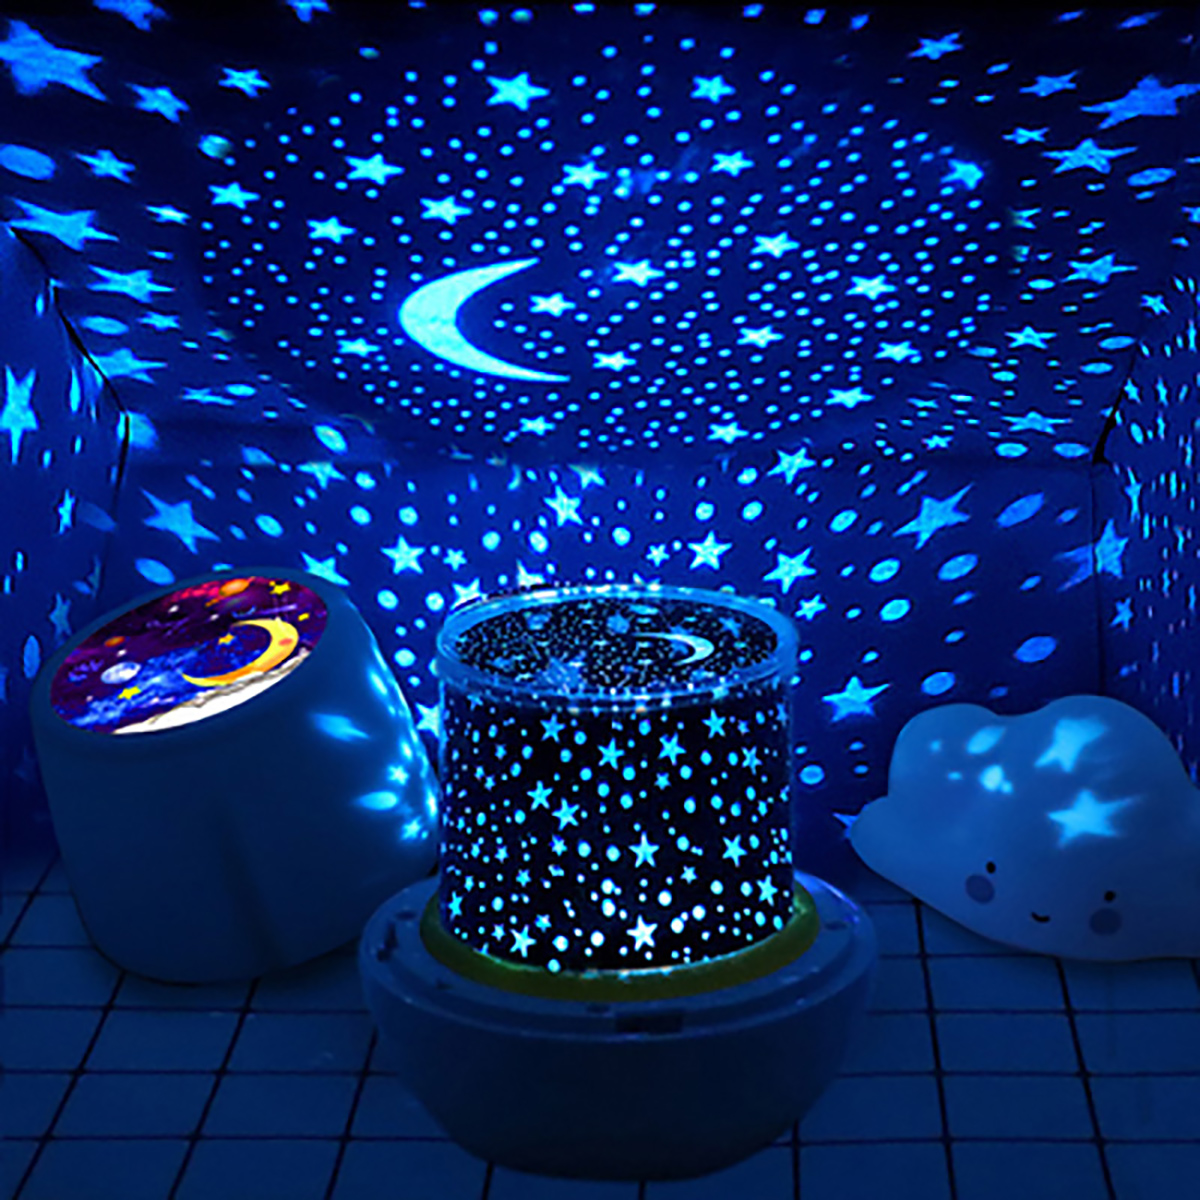 Romantic-Starry-Night-Sky-Projector-Lamp-Cosmos-Star-LED-Light-Universe-Kid-Gift-1795916-5